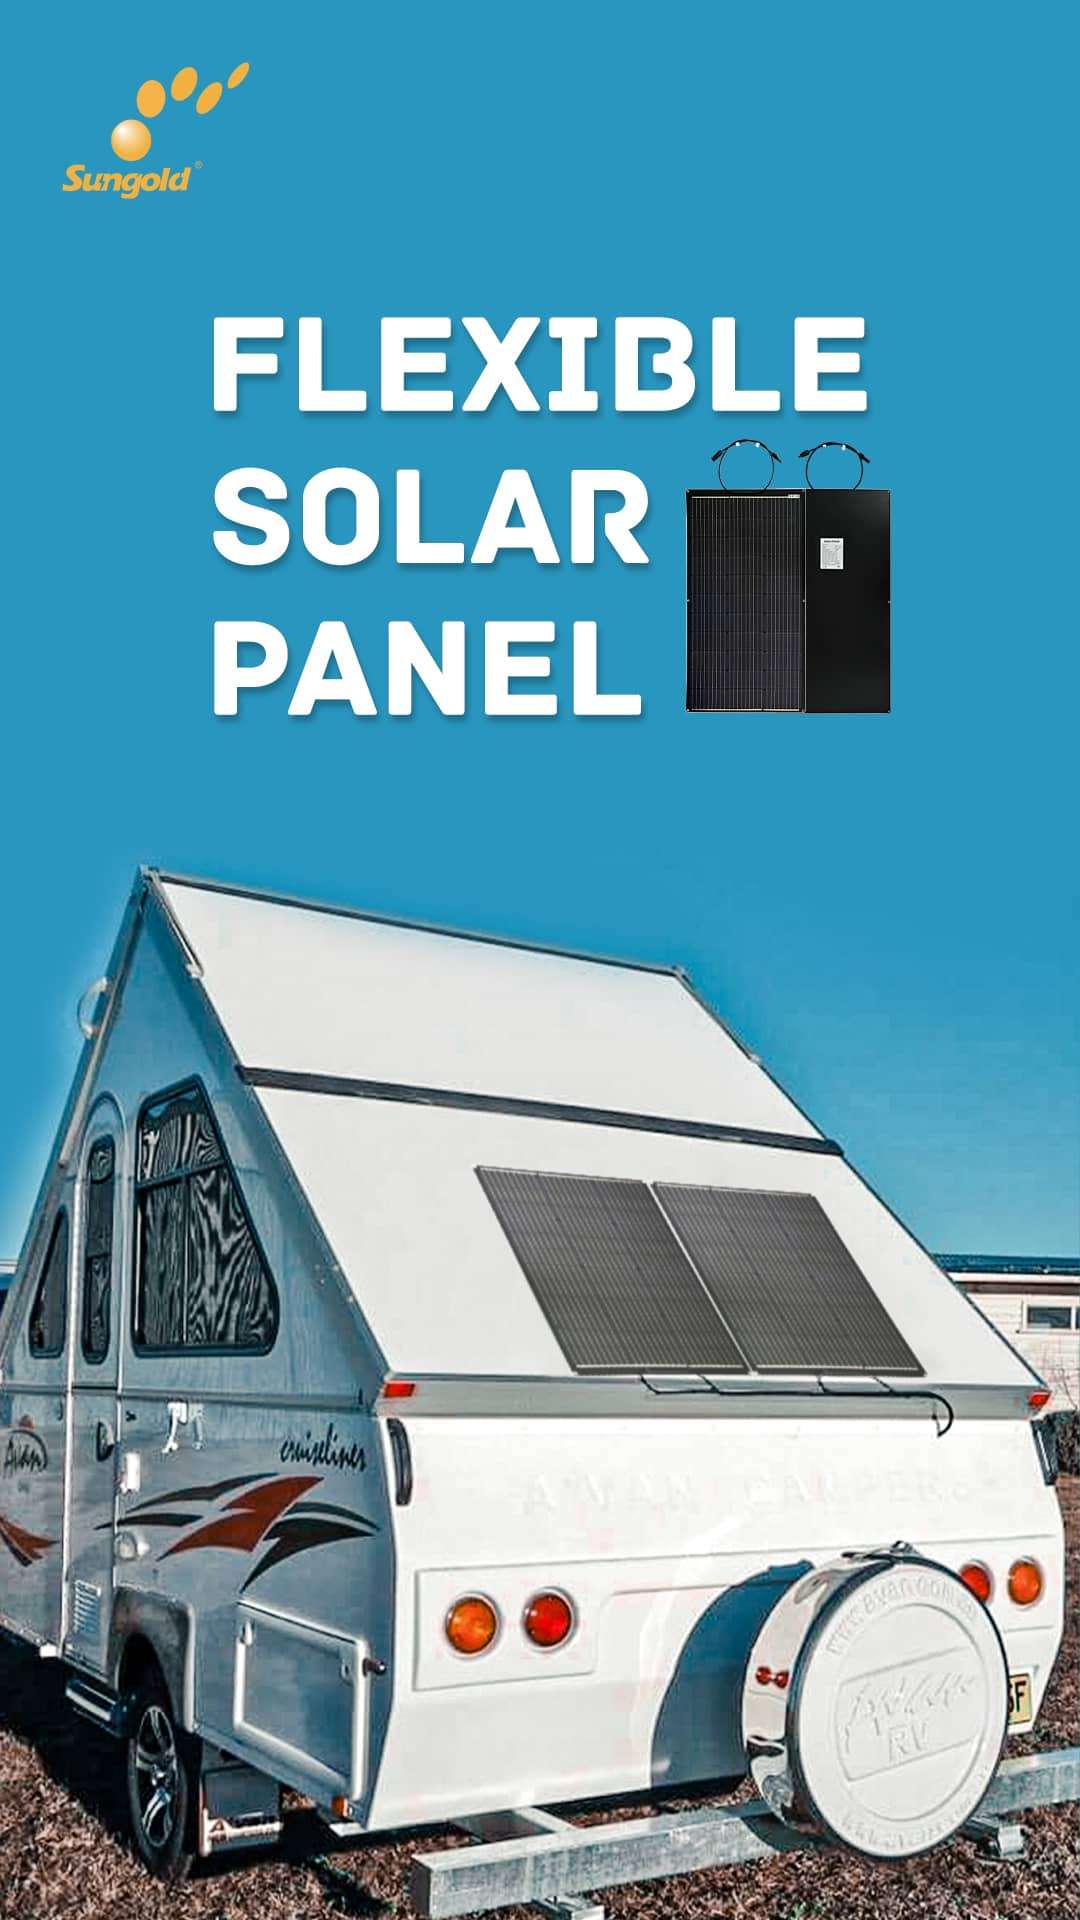 Installing a Flexible Solar Panel Aboard Your RV